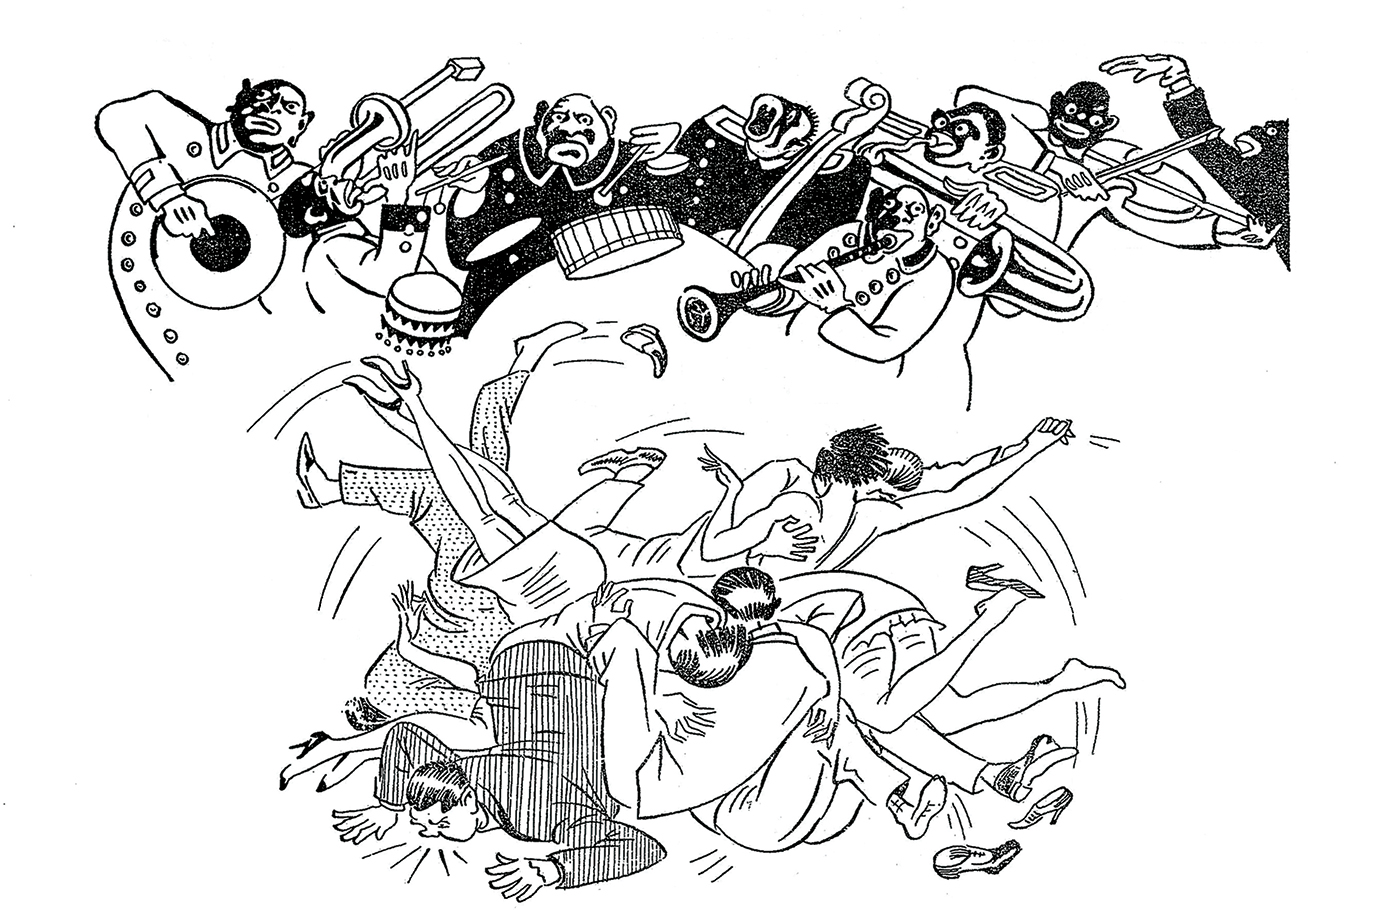 Black and white Cartoon of jazz musicians and dancers from Resimli Persembe no 89 3 February 1927